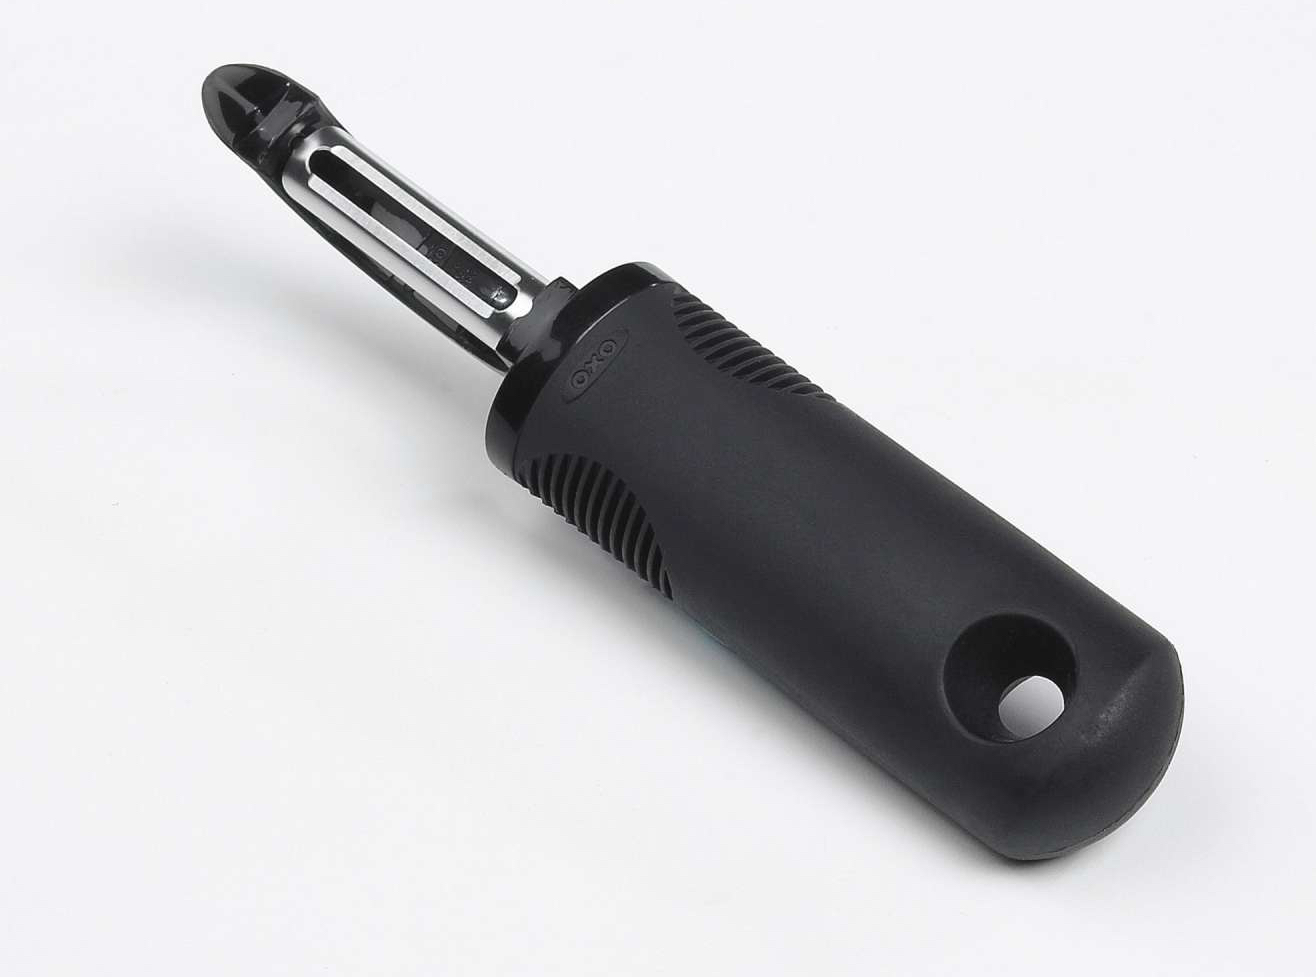 A view of the OXO peeler with an ergonomic handle.